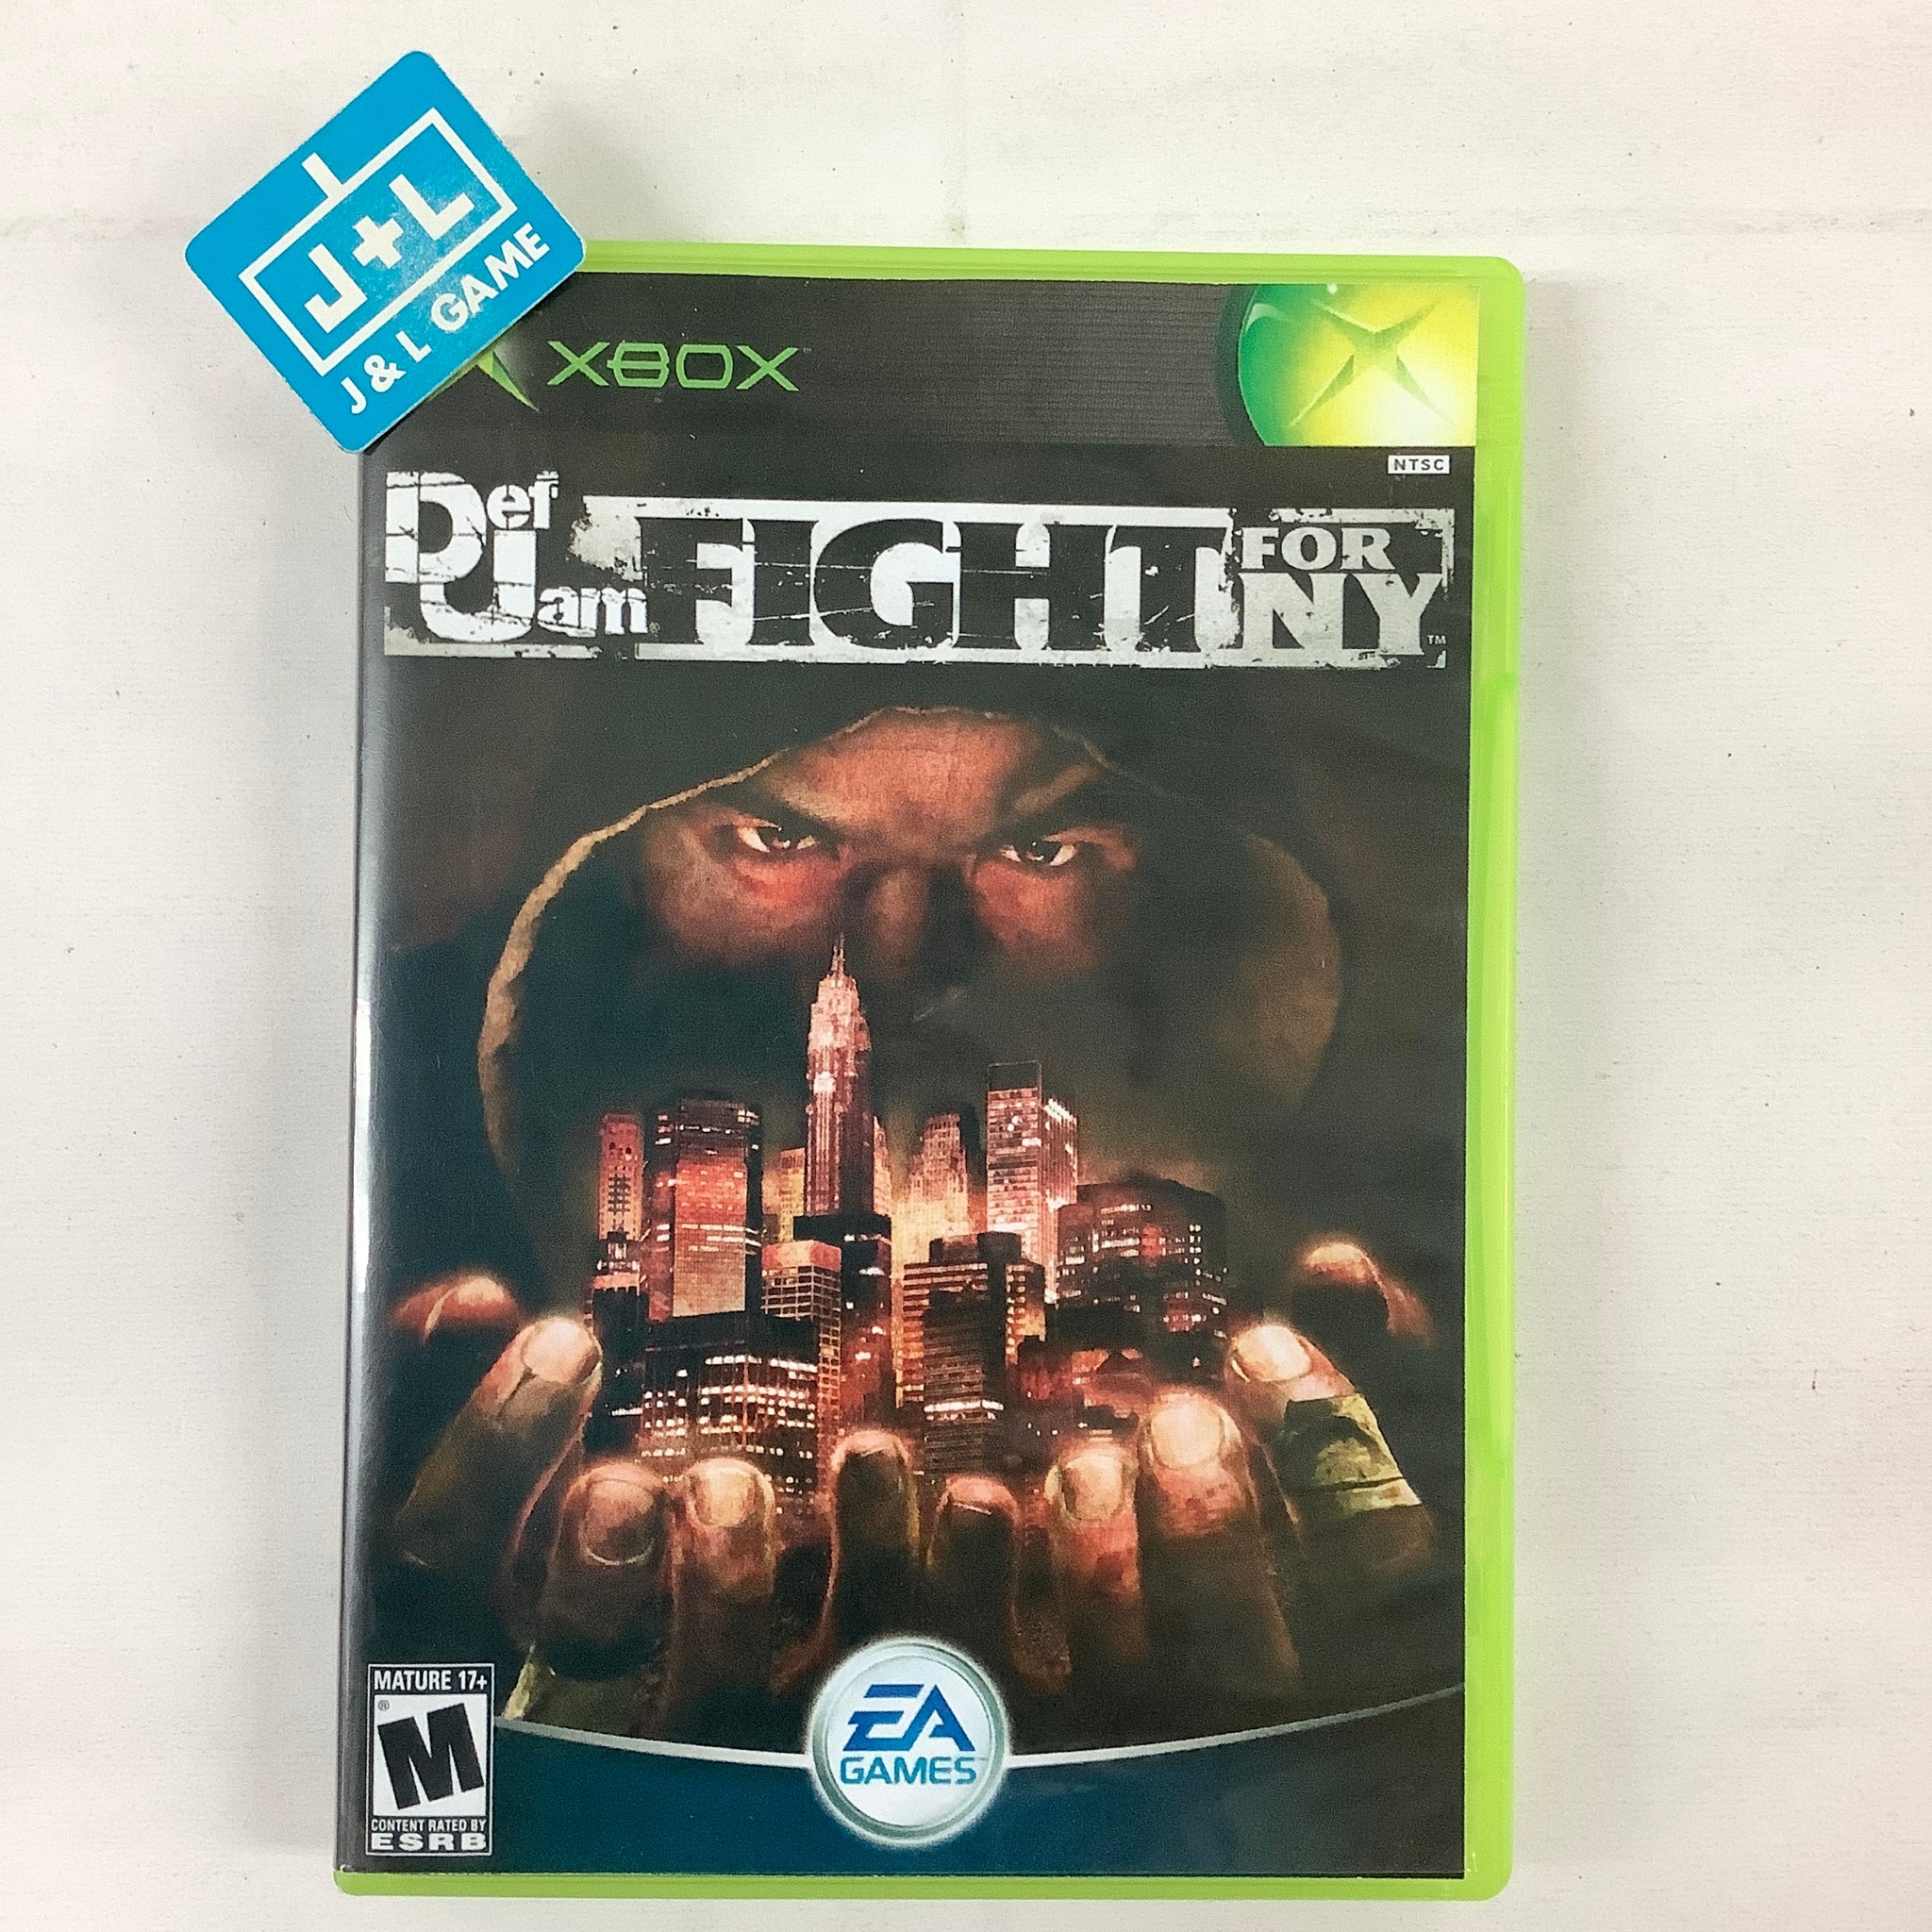 7 Games Like Def Jam Fight for NY for PS4 – Games Like